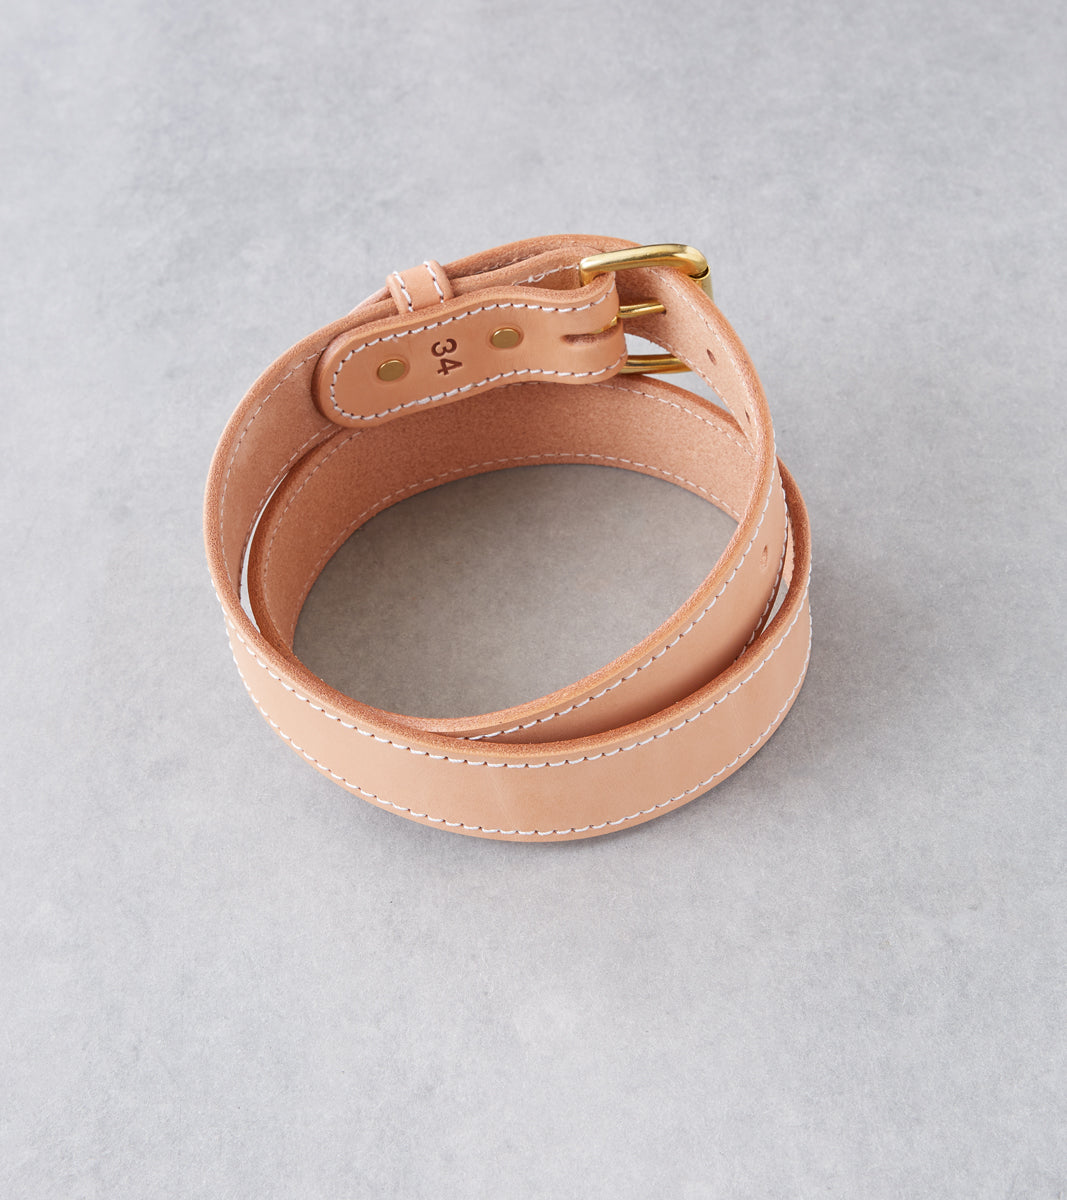 Grease leather belt nature, Brown